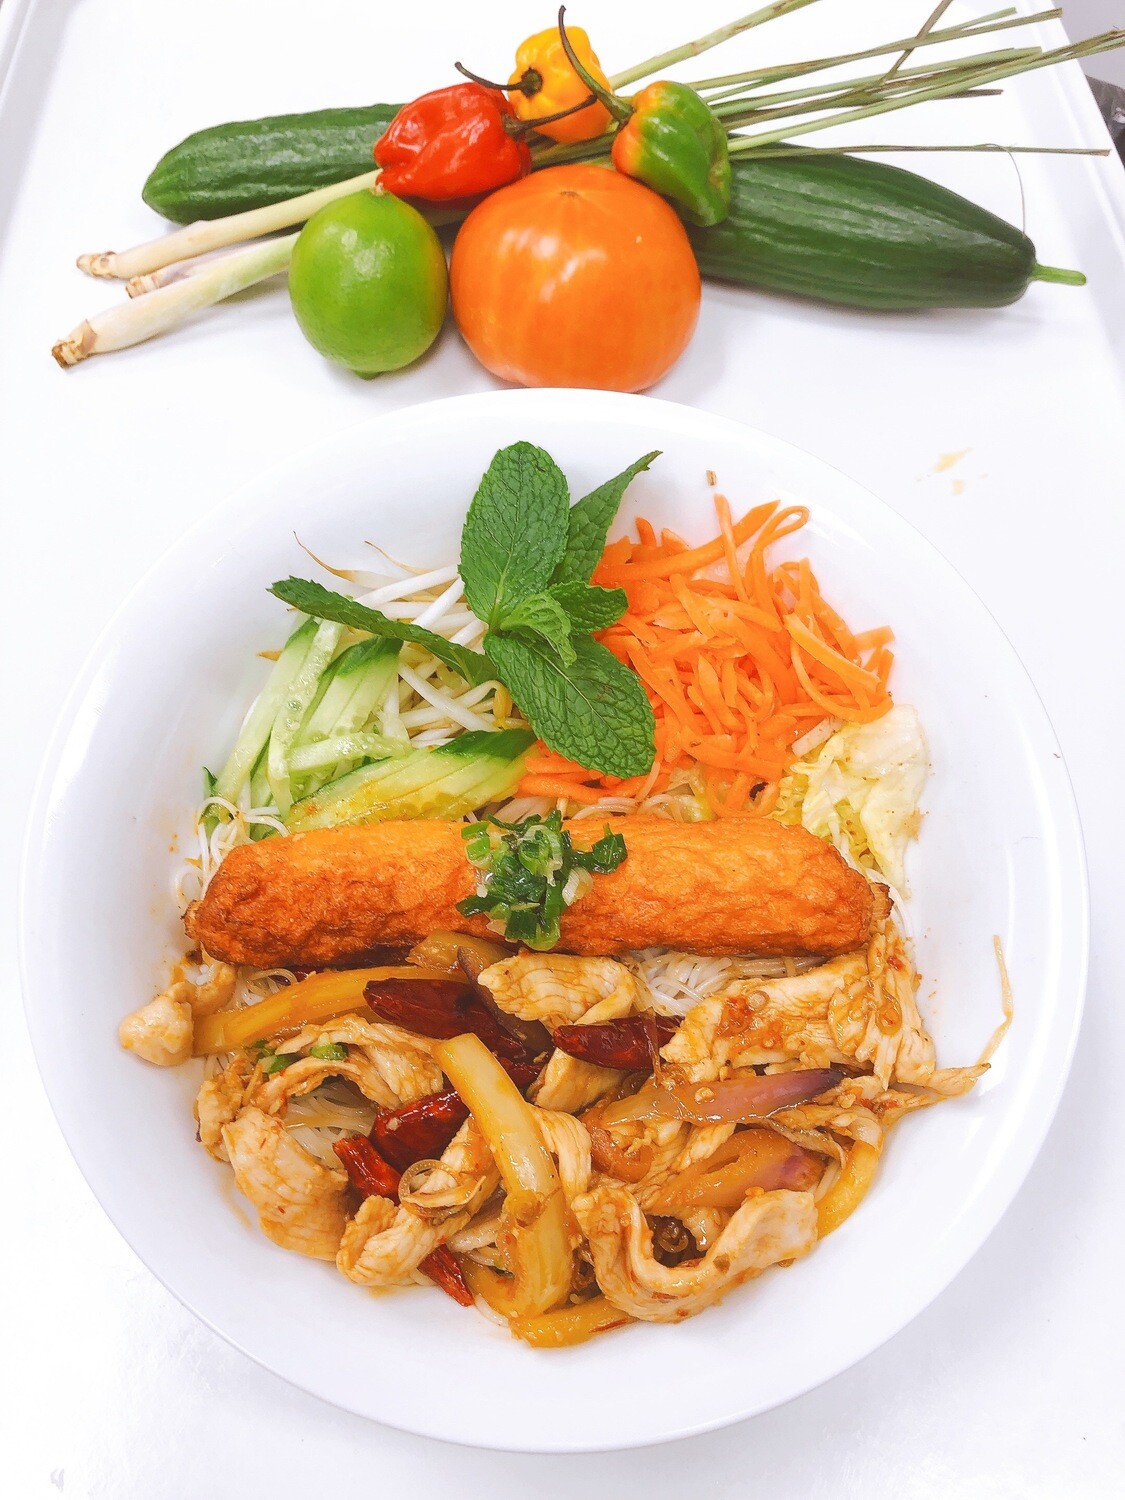 413- Stir Fried Chicken with Lemon Grass and Hot Pepper on Vermicelli (Plus One Item)